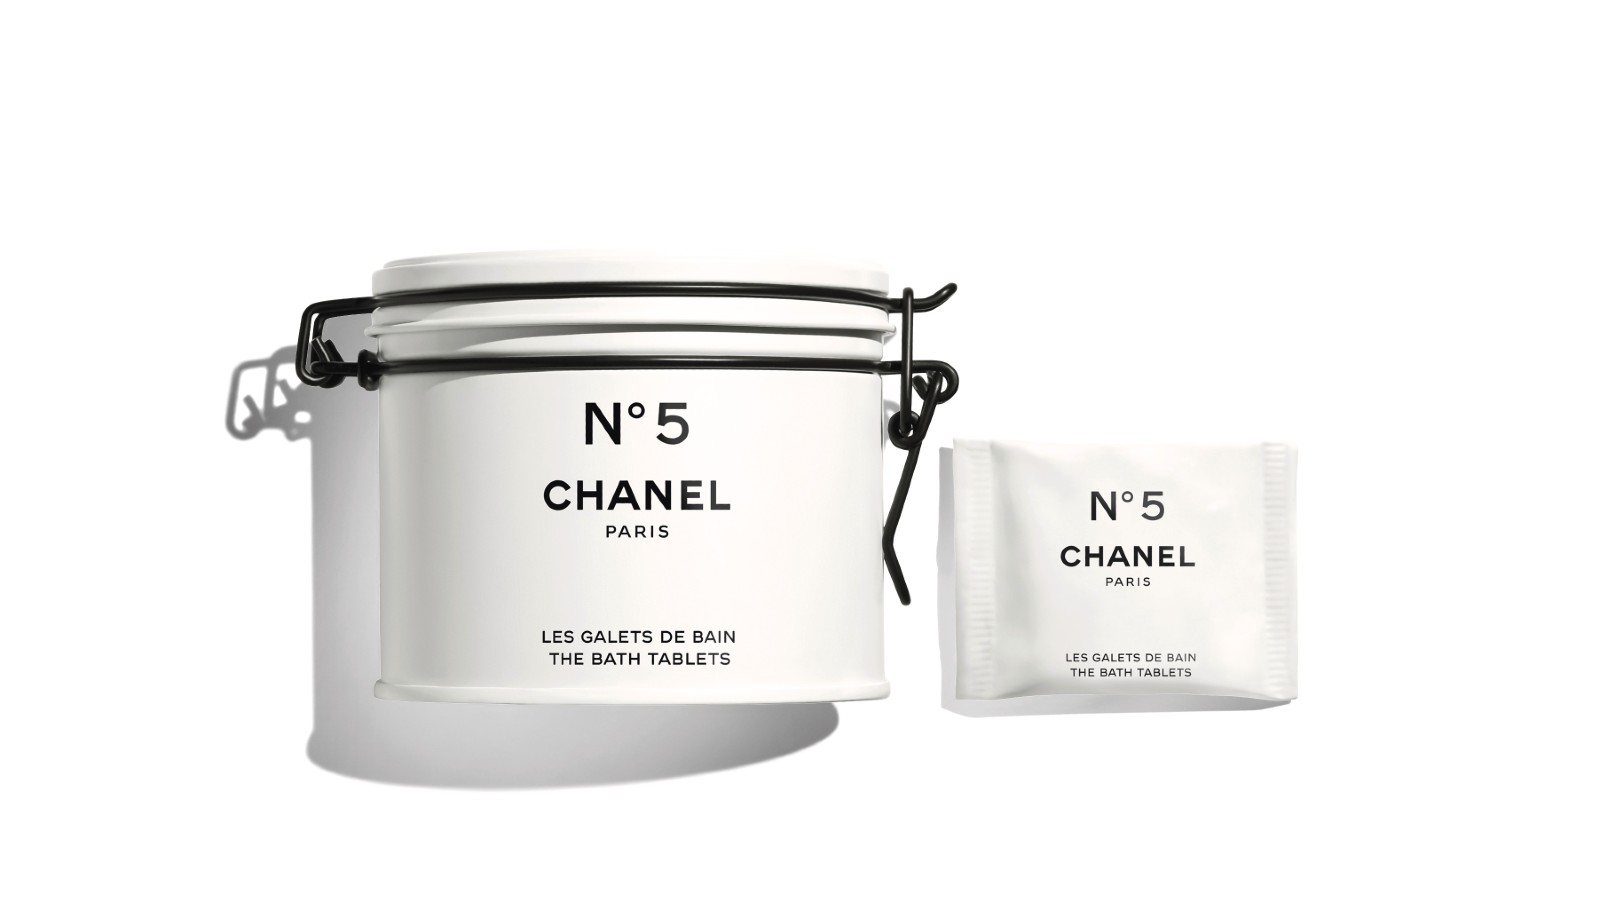 Chanel No. 5 now comes in bath tablets